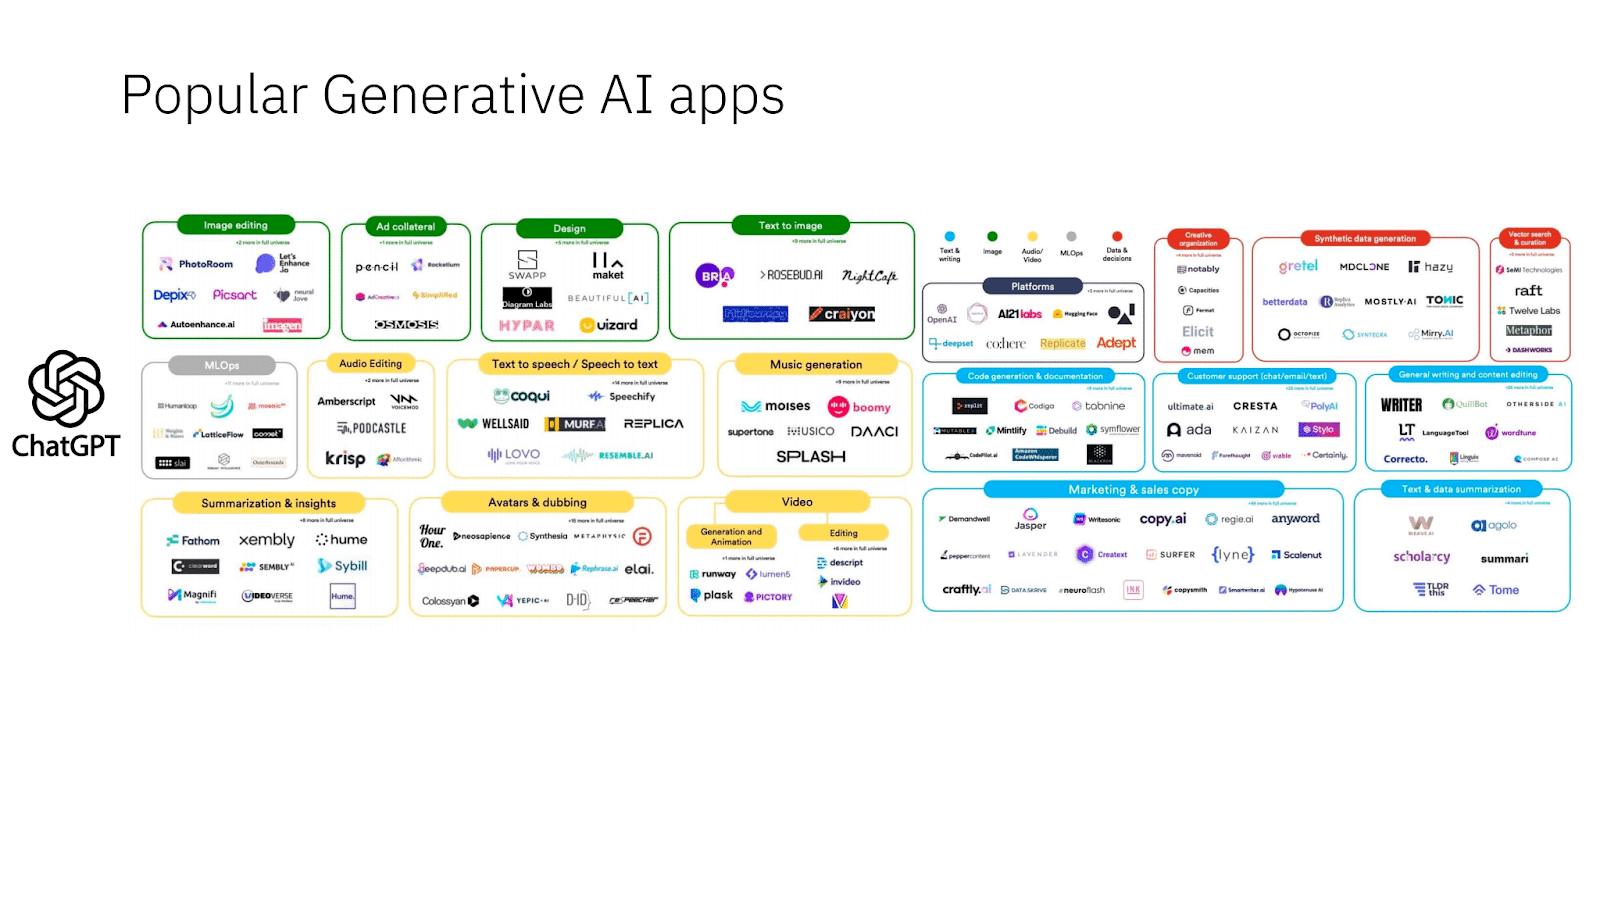 Image showing dozens of popular generative AI apps in various categories